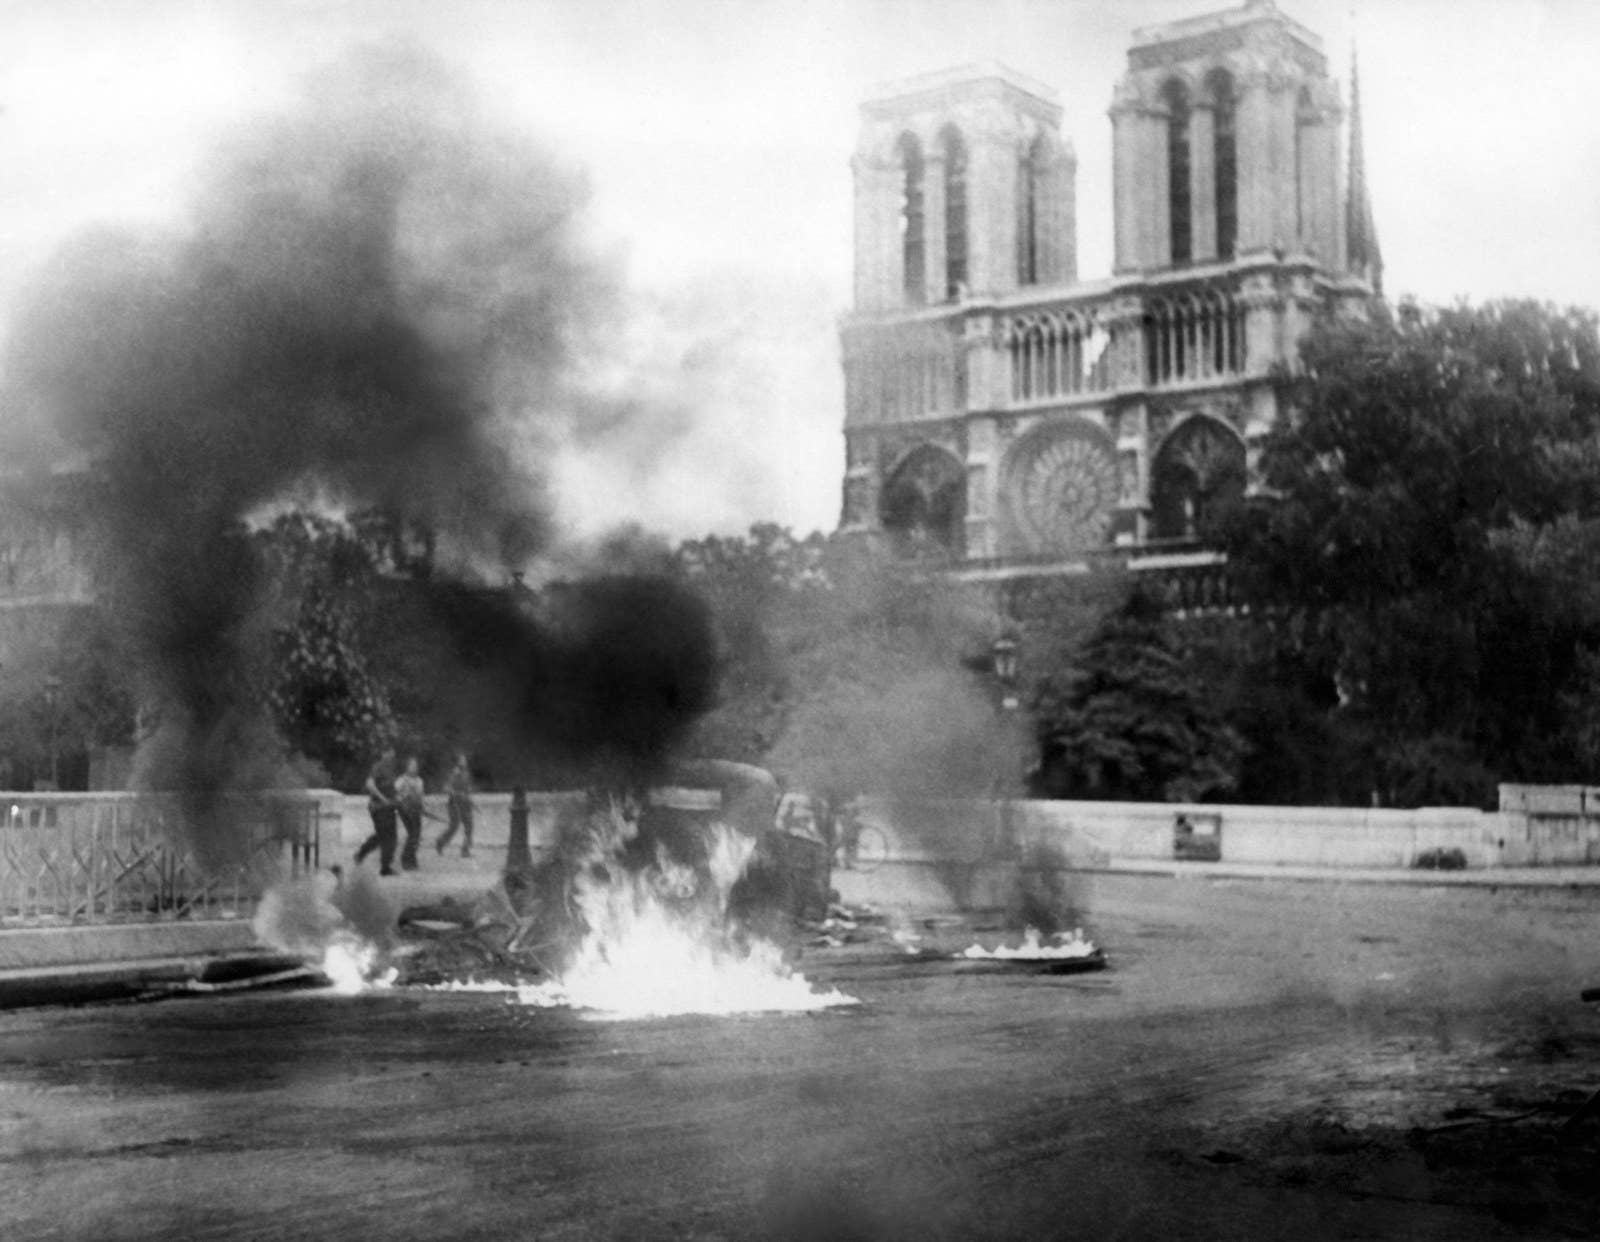 A photo taken circa Aug. 23, 1944 during World War II shows a flaming vehicle close to the Pont Saint-Michel and Notre Dame Cathedral Notre-Dame as part of the "Battle of Paris" opposing the French Forces of the Interior and remaining Nazi forces, a few days before the Liberation of Paris on Aug. 25, 1944.